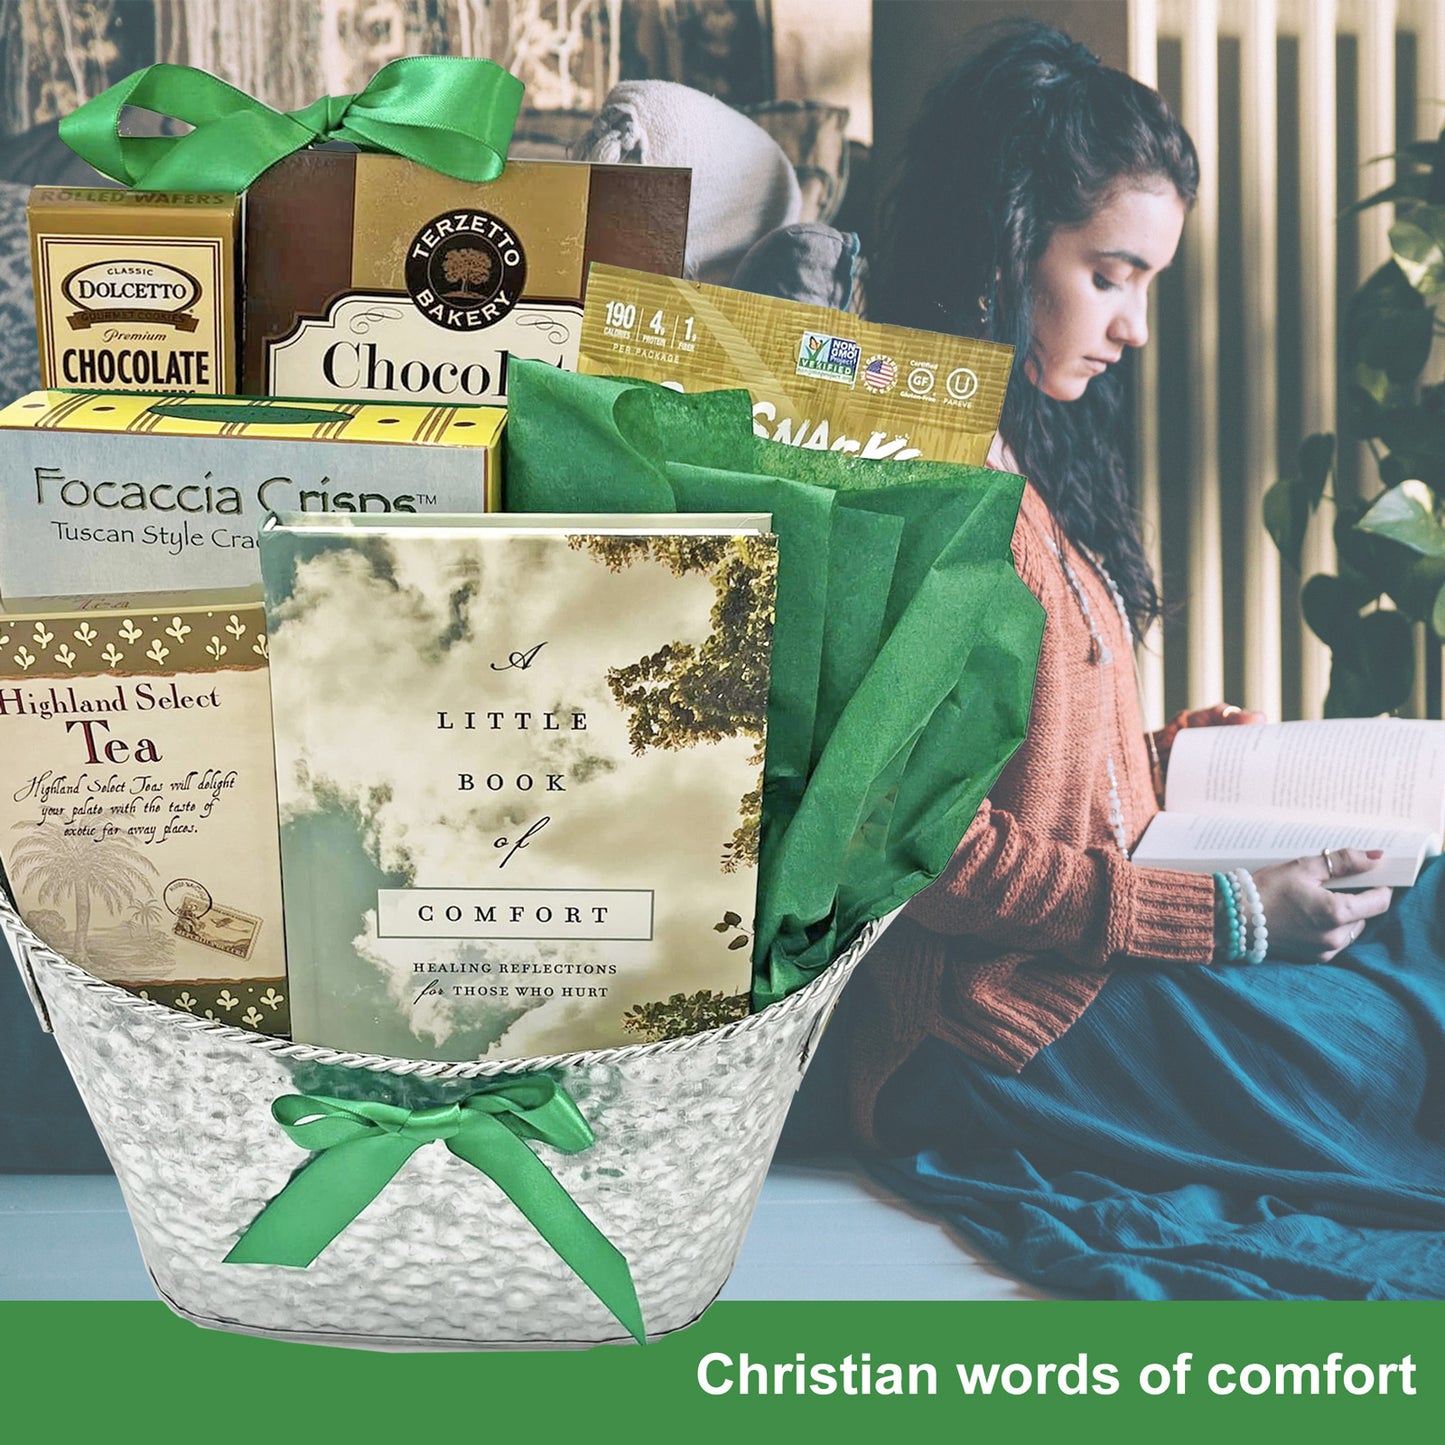 Little Book of Comfort Christian Sympathy Gift Basket for Sending Condolences on the Loss of a Loved One